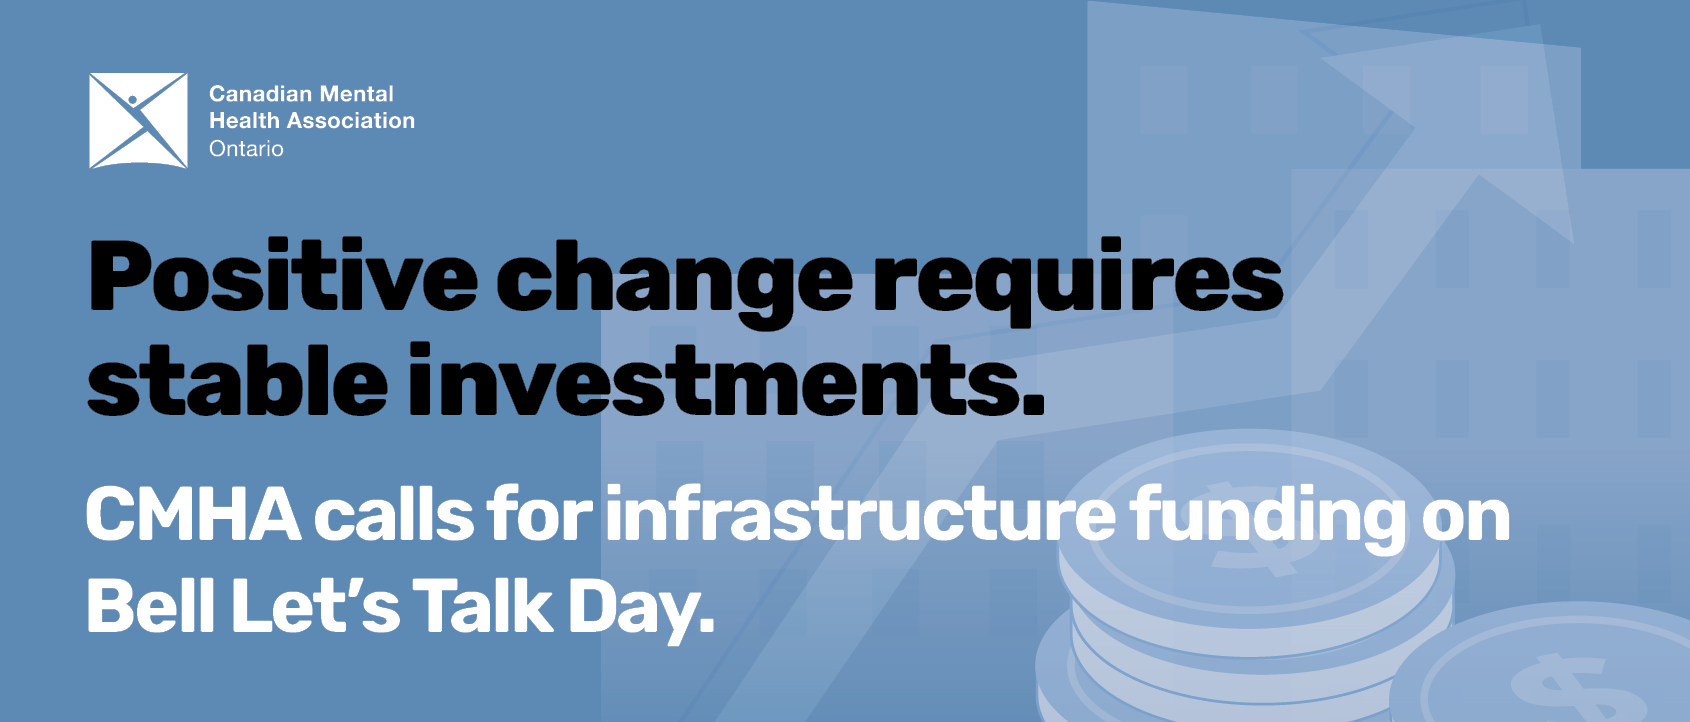 Text reads, "Positive change requires stable investments. CMHA calls for infrastructure funding on Bell Let's Talk Day." Illustration of coins and an arrow pointing upward against a blue background.